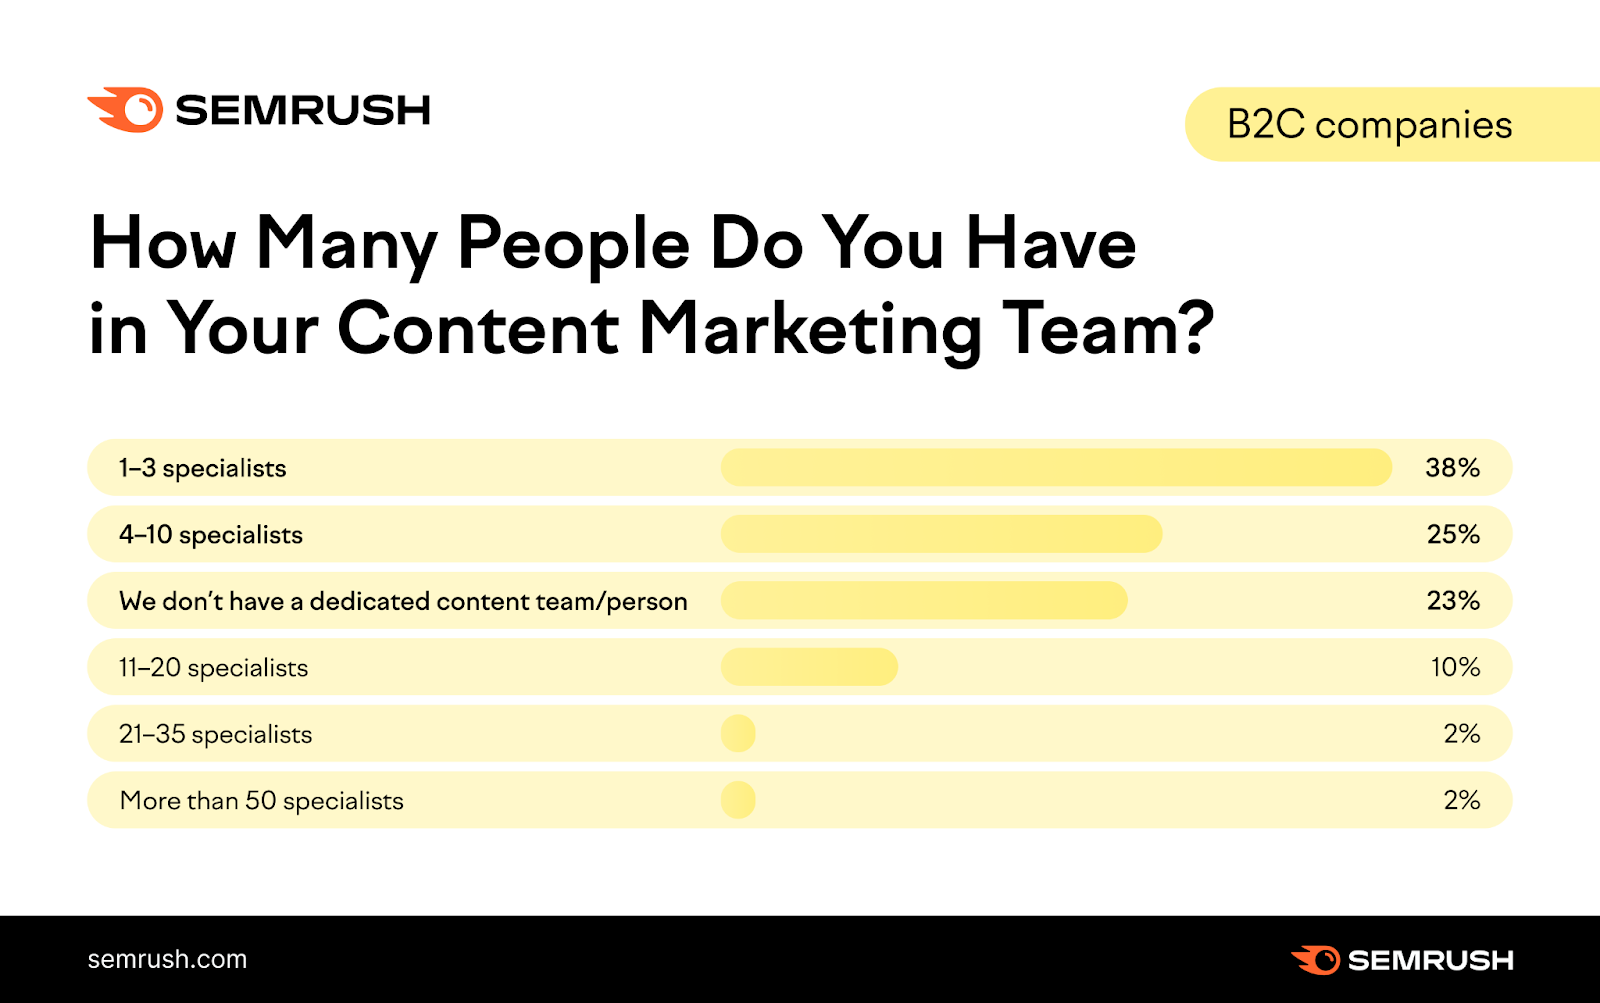 Content marketing team size in B2C